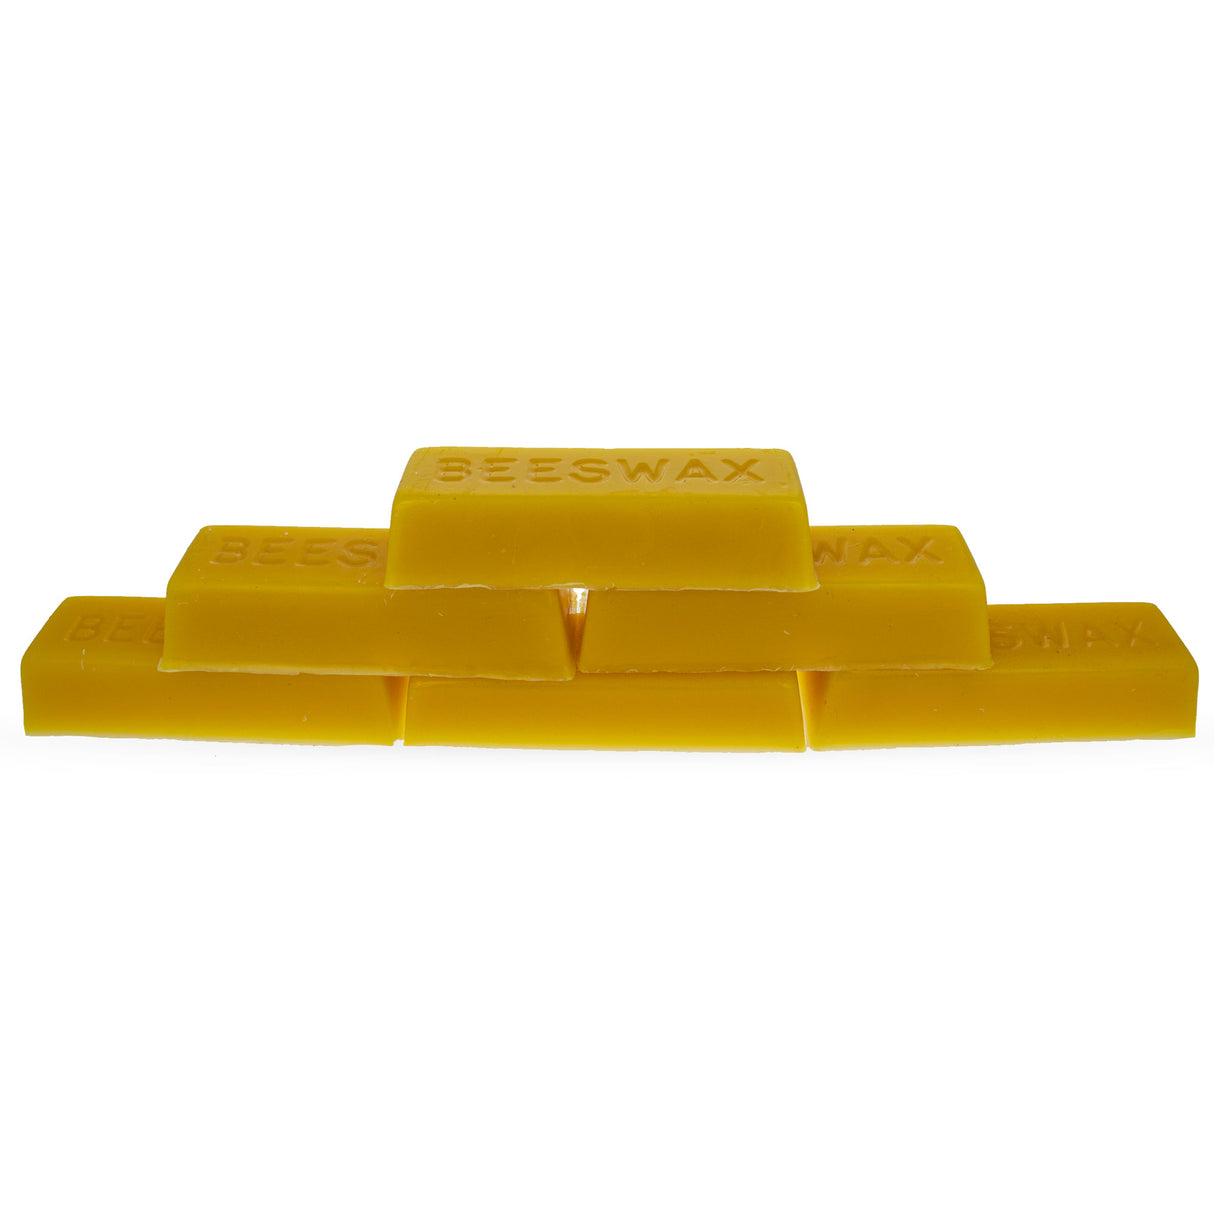 Bees Wax Set of 6 Yellow Triple Filtered Rectangle Beeswax Bars 6 oz Total in Yellow color Rectangle